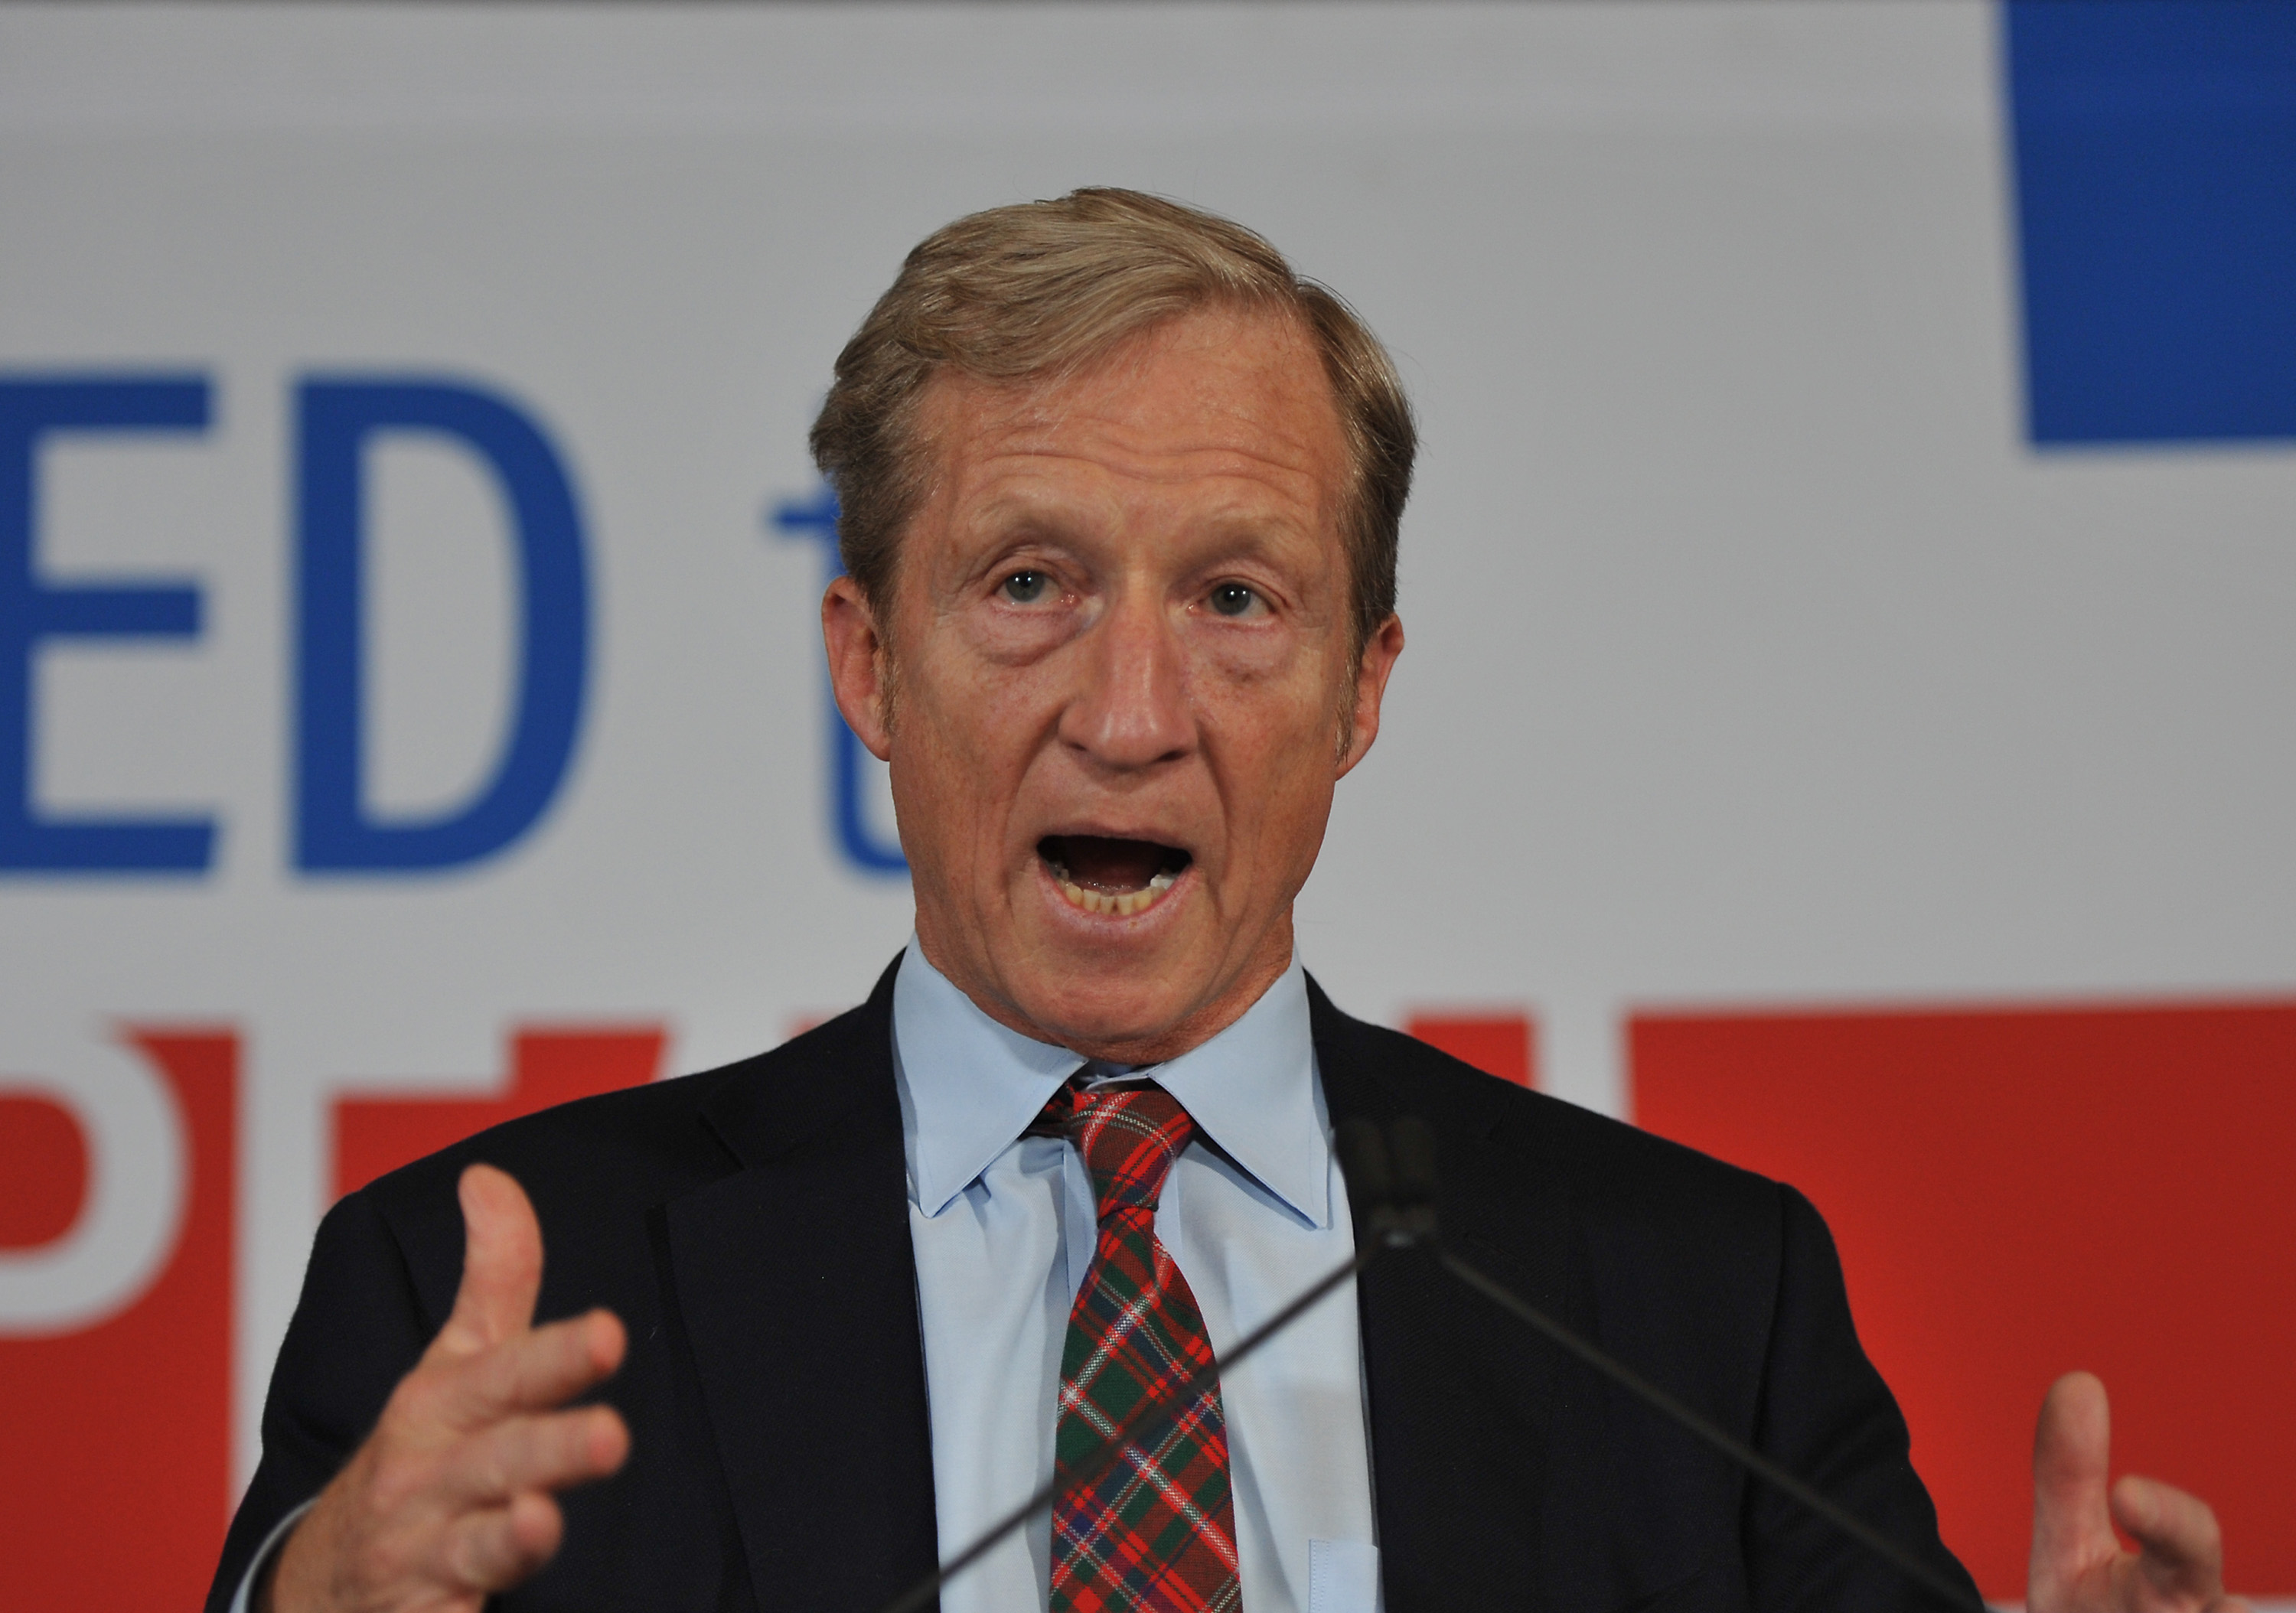 Tom Steyer and his favorite tie.